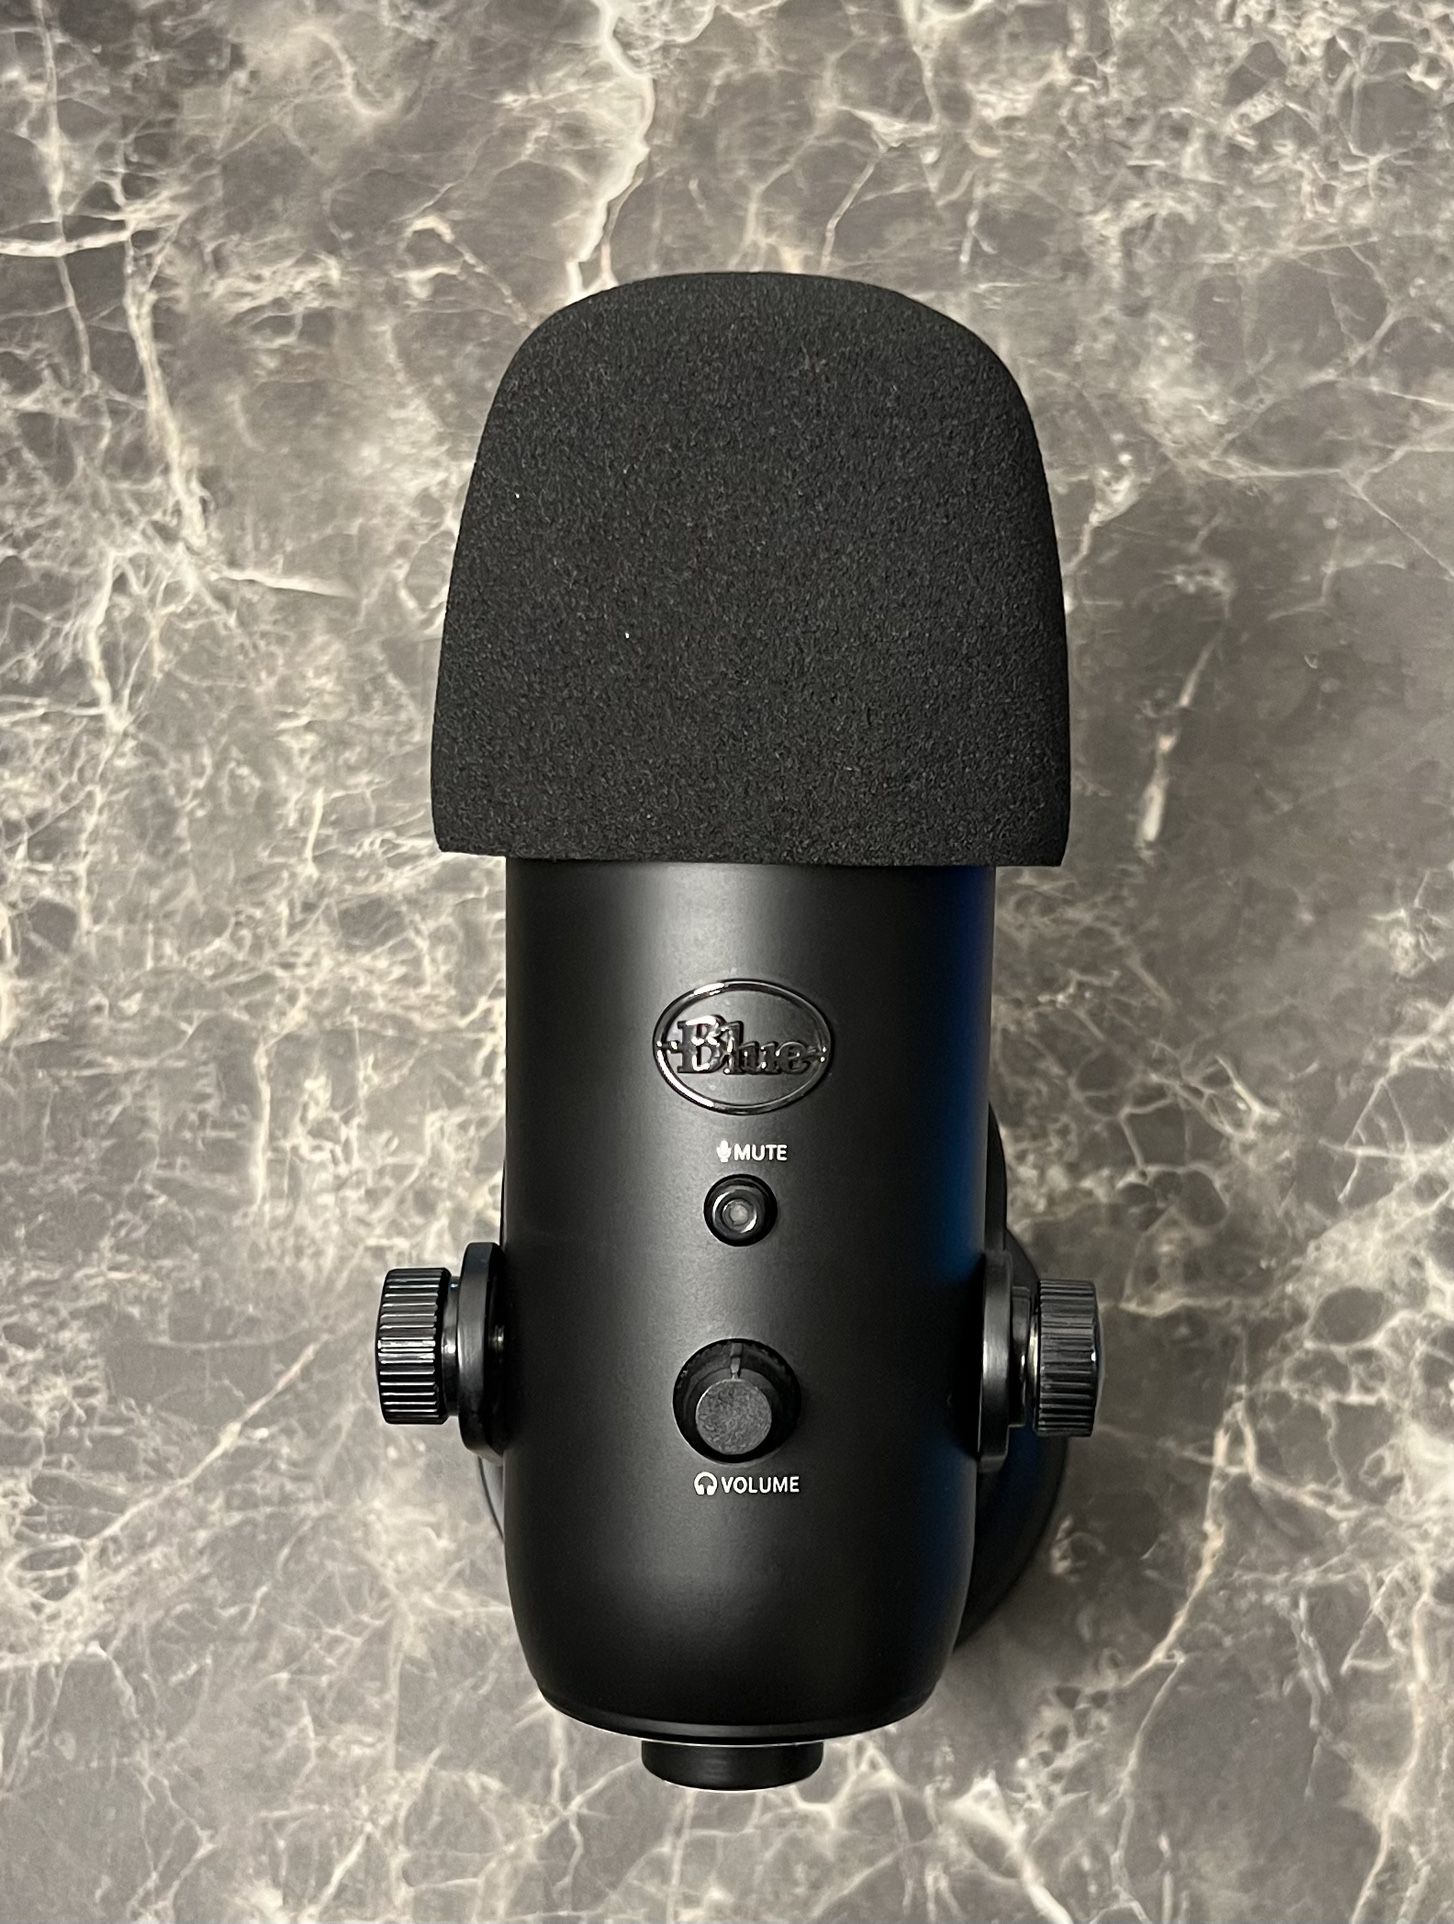 Blue Yeti Blackout Edition Microphone + FREE POP FILTER